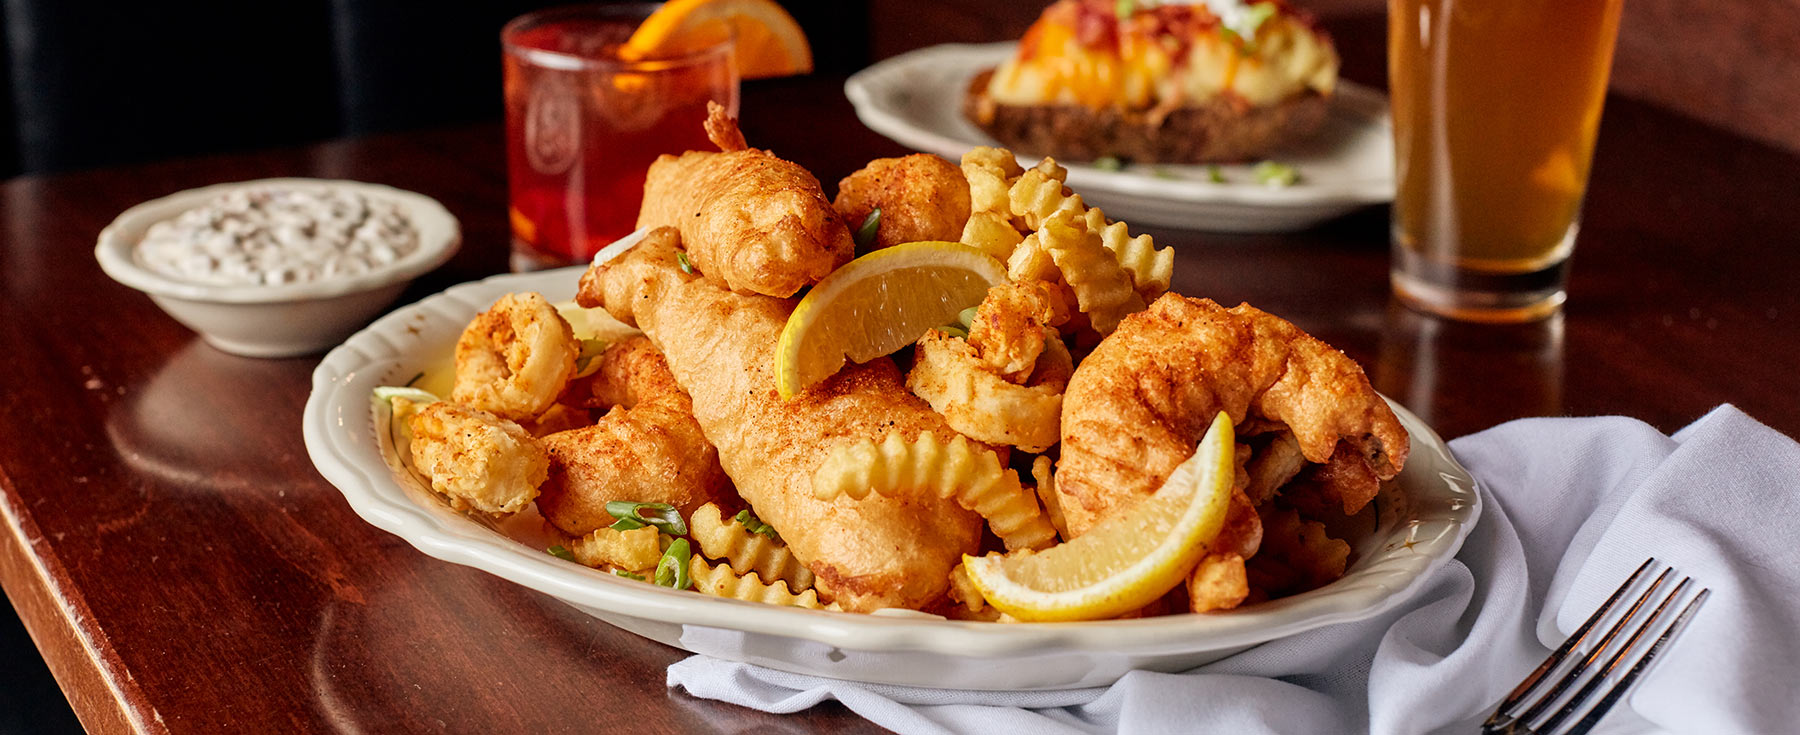 Joey's Fried Seafood Basket - Offered on Friday Nights